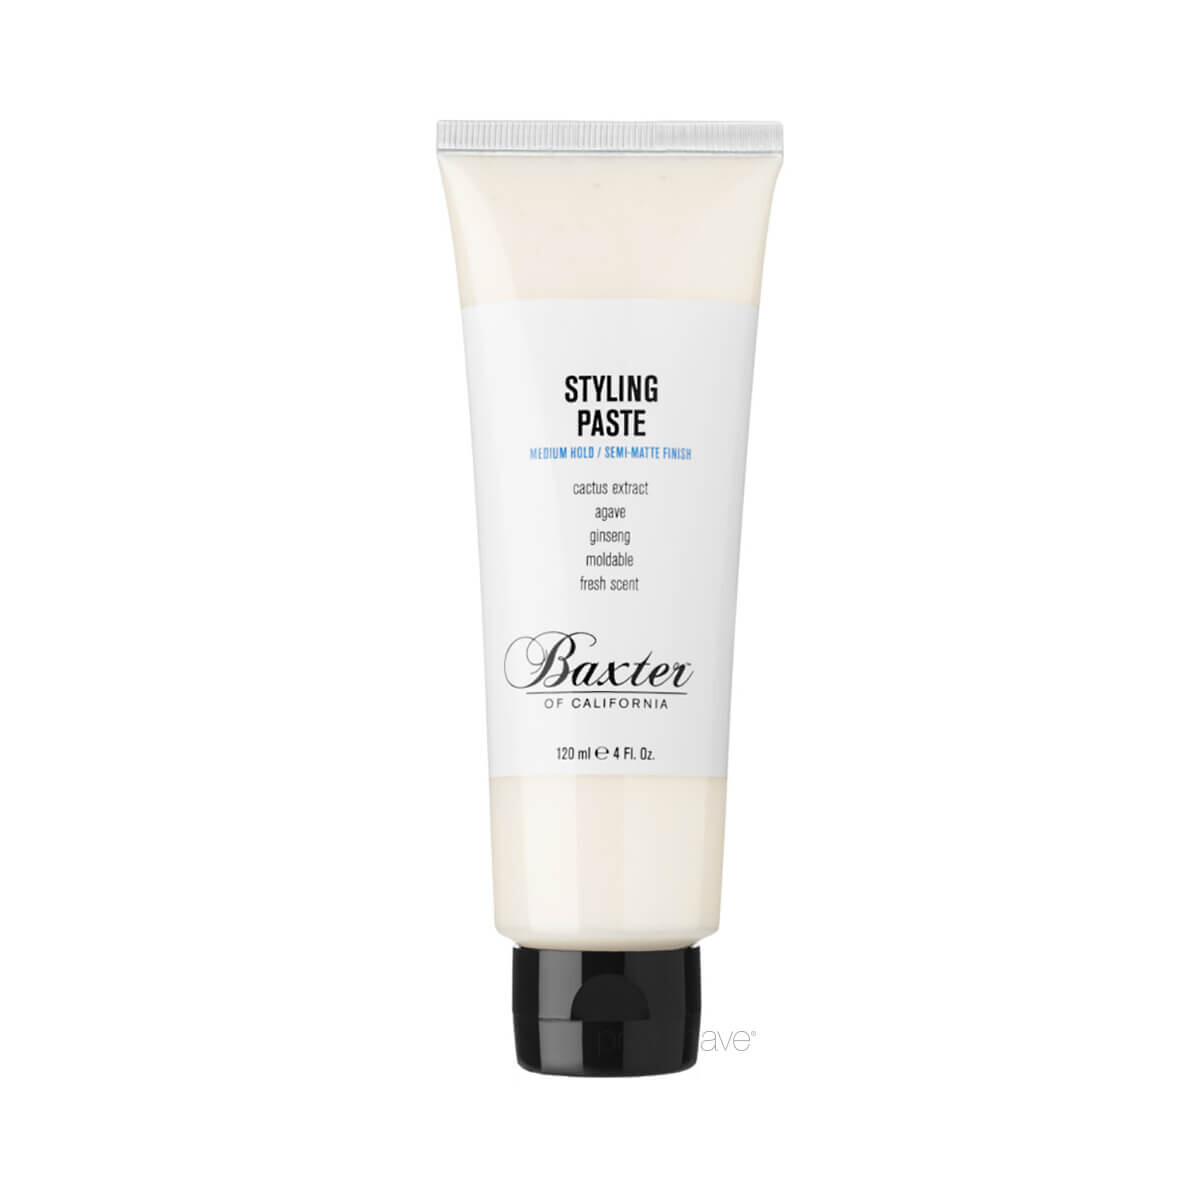 Baxter of California Styling Paste, 100 ml.